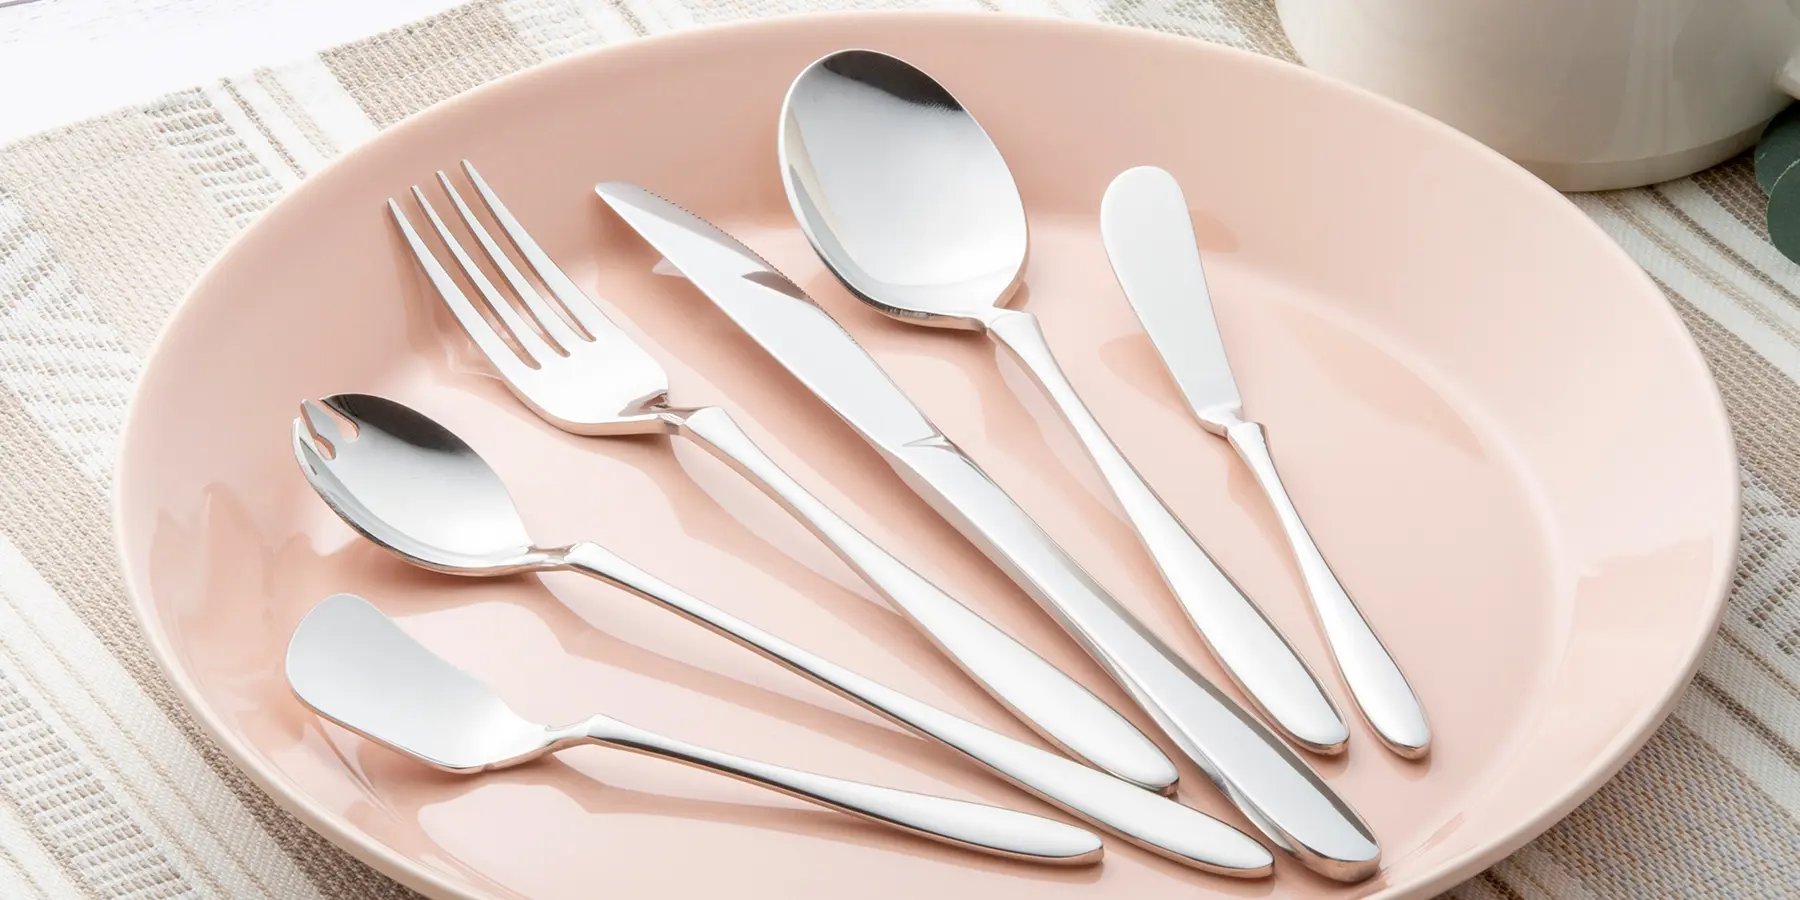 Discover our great selection of Flatware & Cutlery  at Globalkitchen Japan.